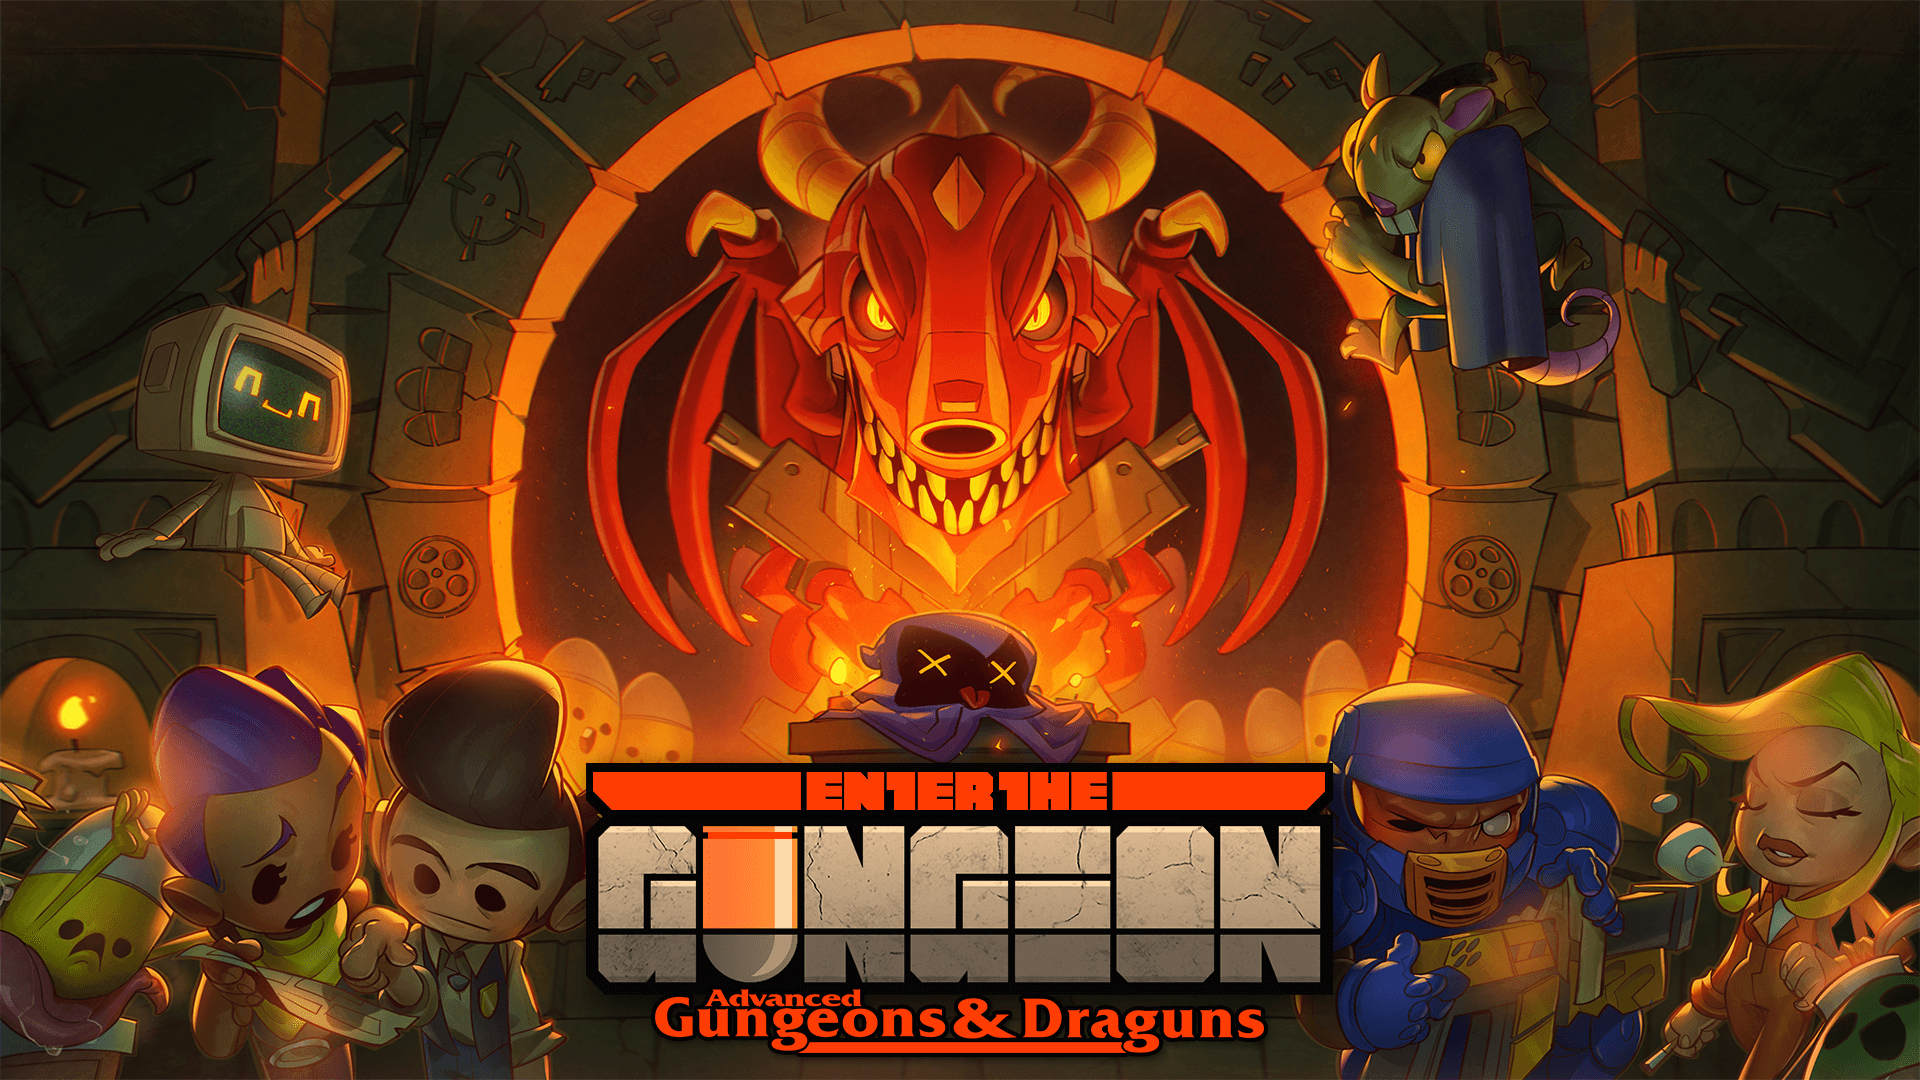 http://www.cosmocover.com/wp-content/uploads/2018/07/Enter-the-Gungeon_AGD-Key-Art.png